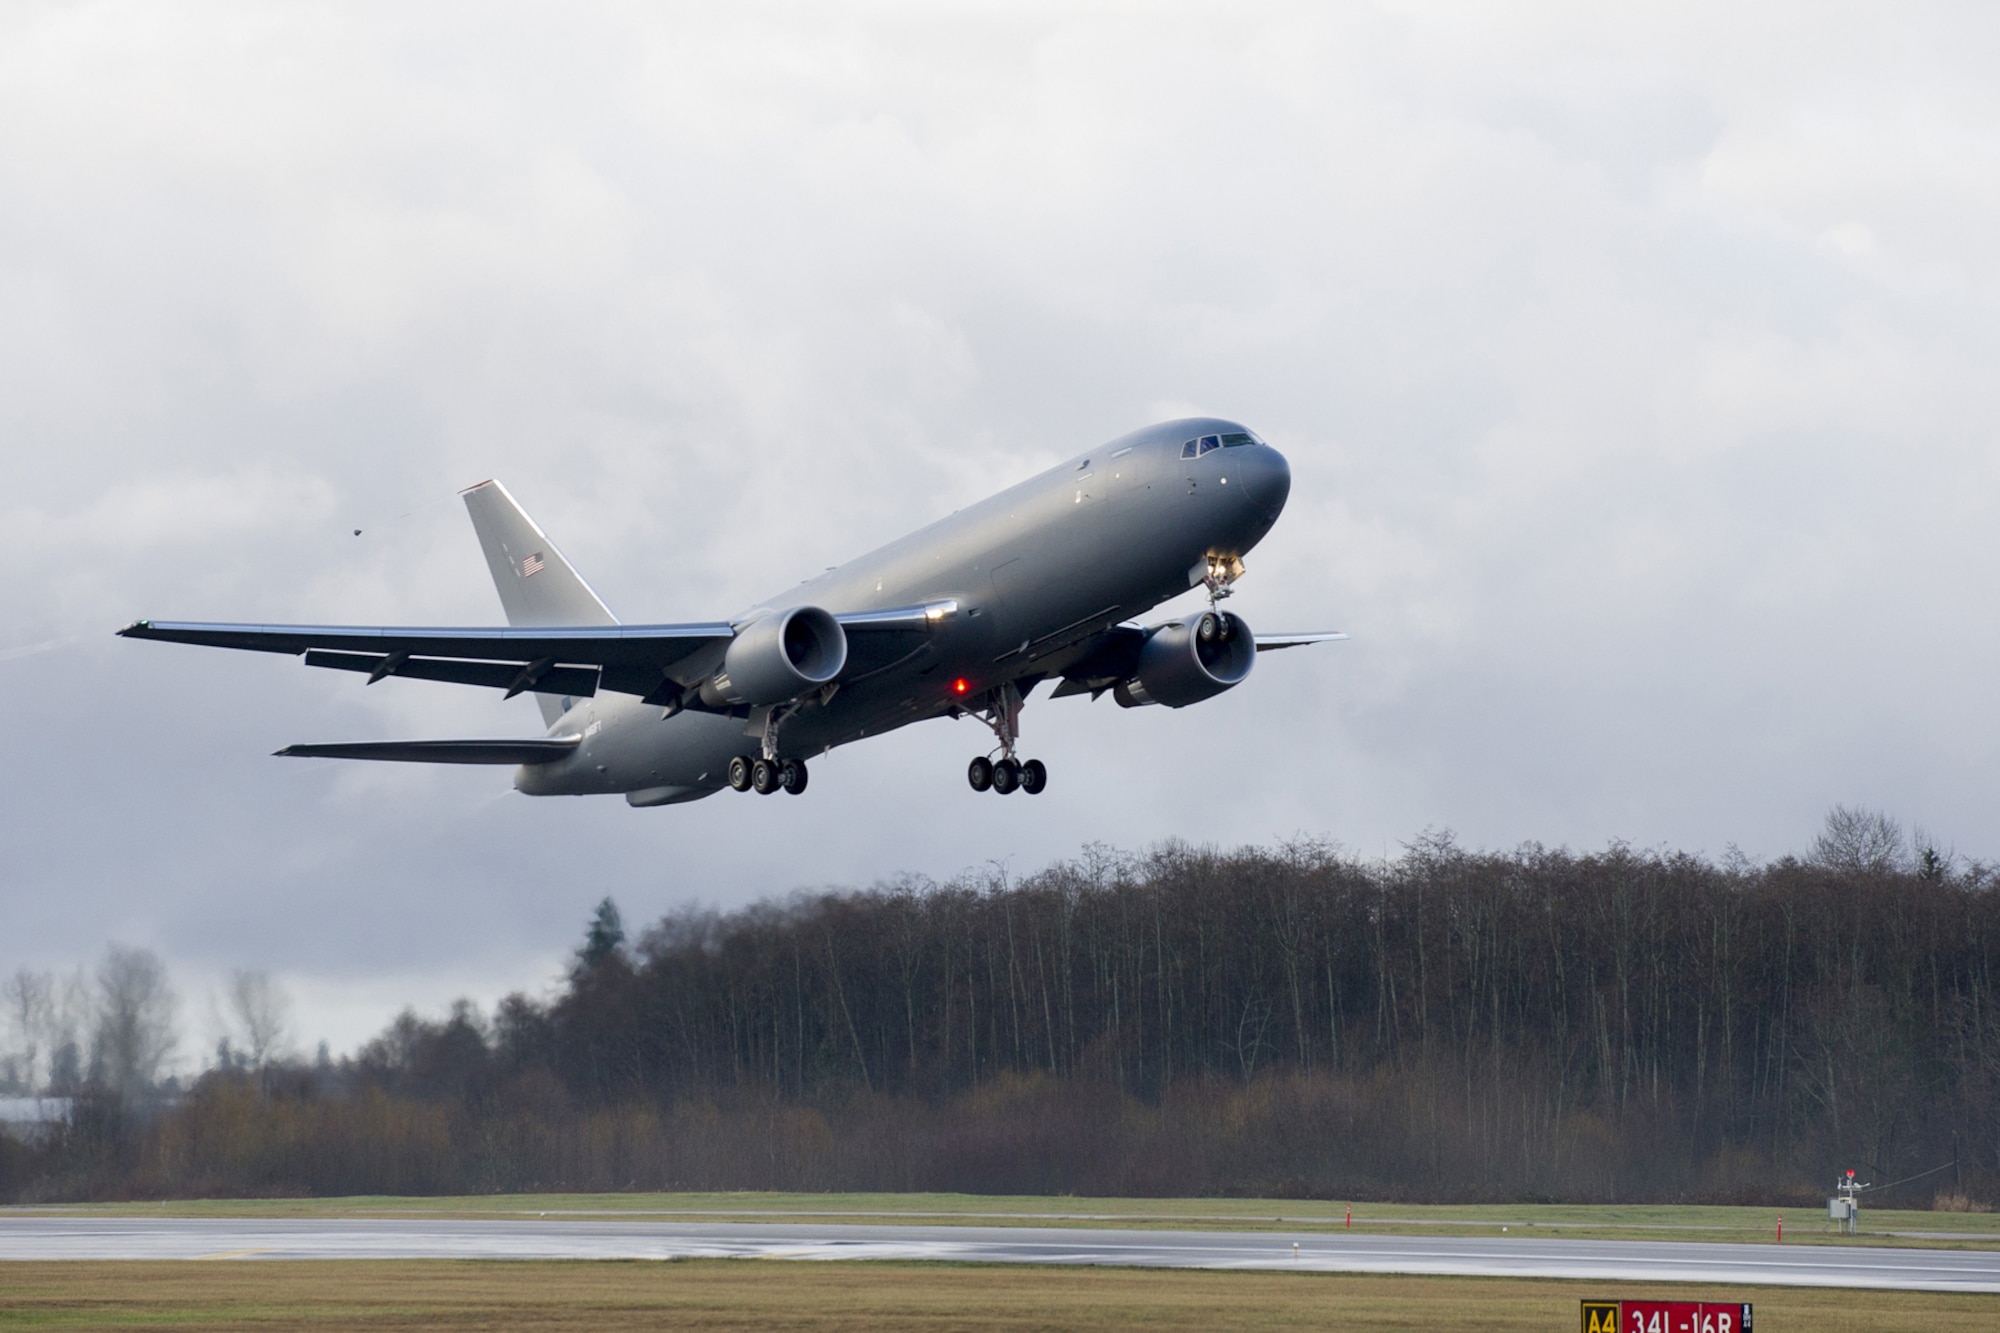 The KC-46A Pegasus development program completed its first flight of Engineering, Manufacturing and Development (EMD) aircraft #1 Dec. 28, 2014. The maiden flight took off from Paine Field in Everett, Washington and landed at Boeing Field, Seattle. (Courtesy photo)